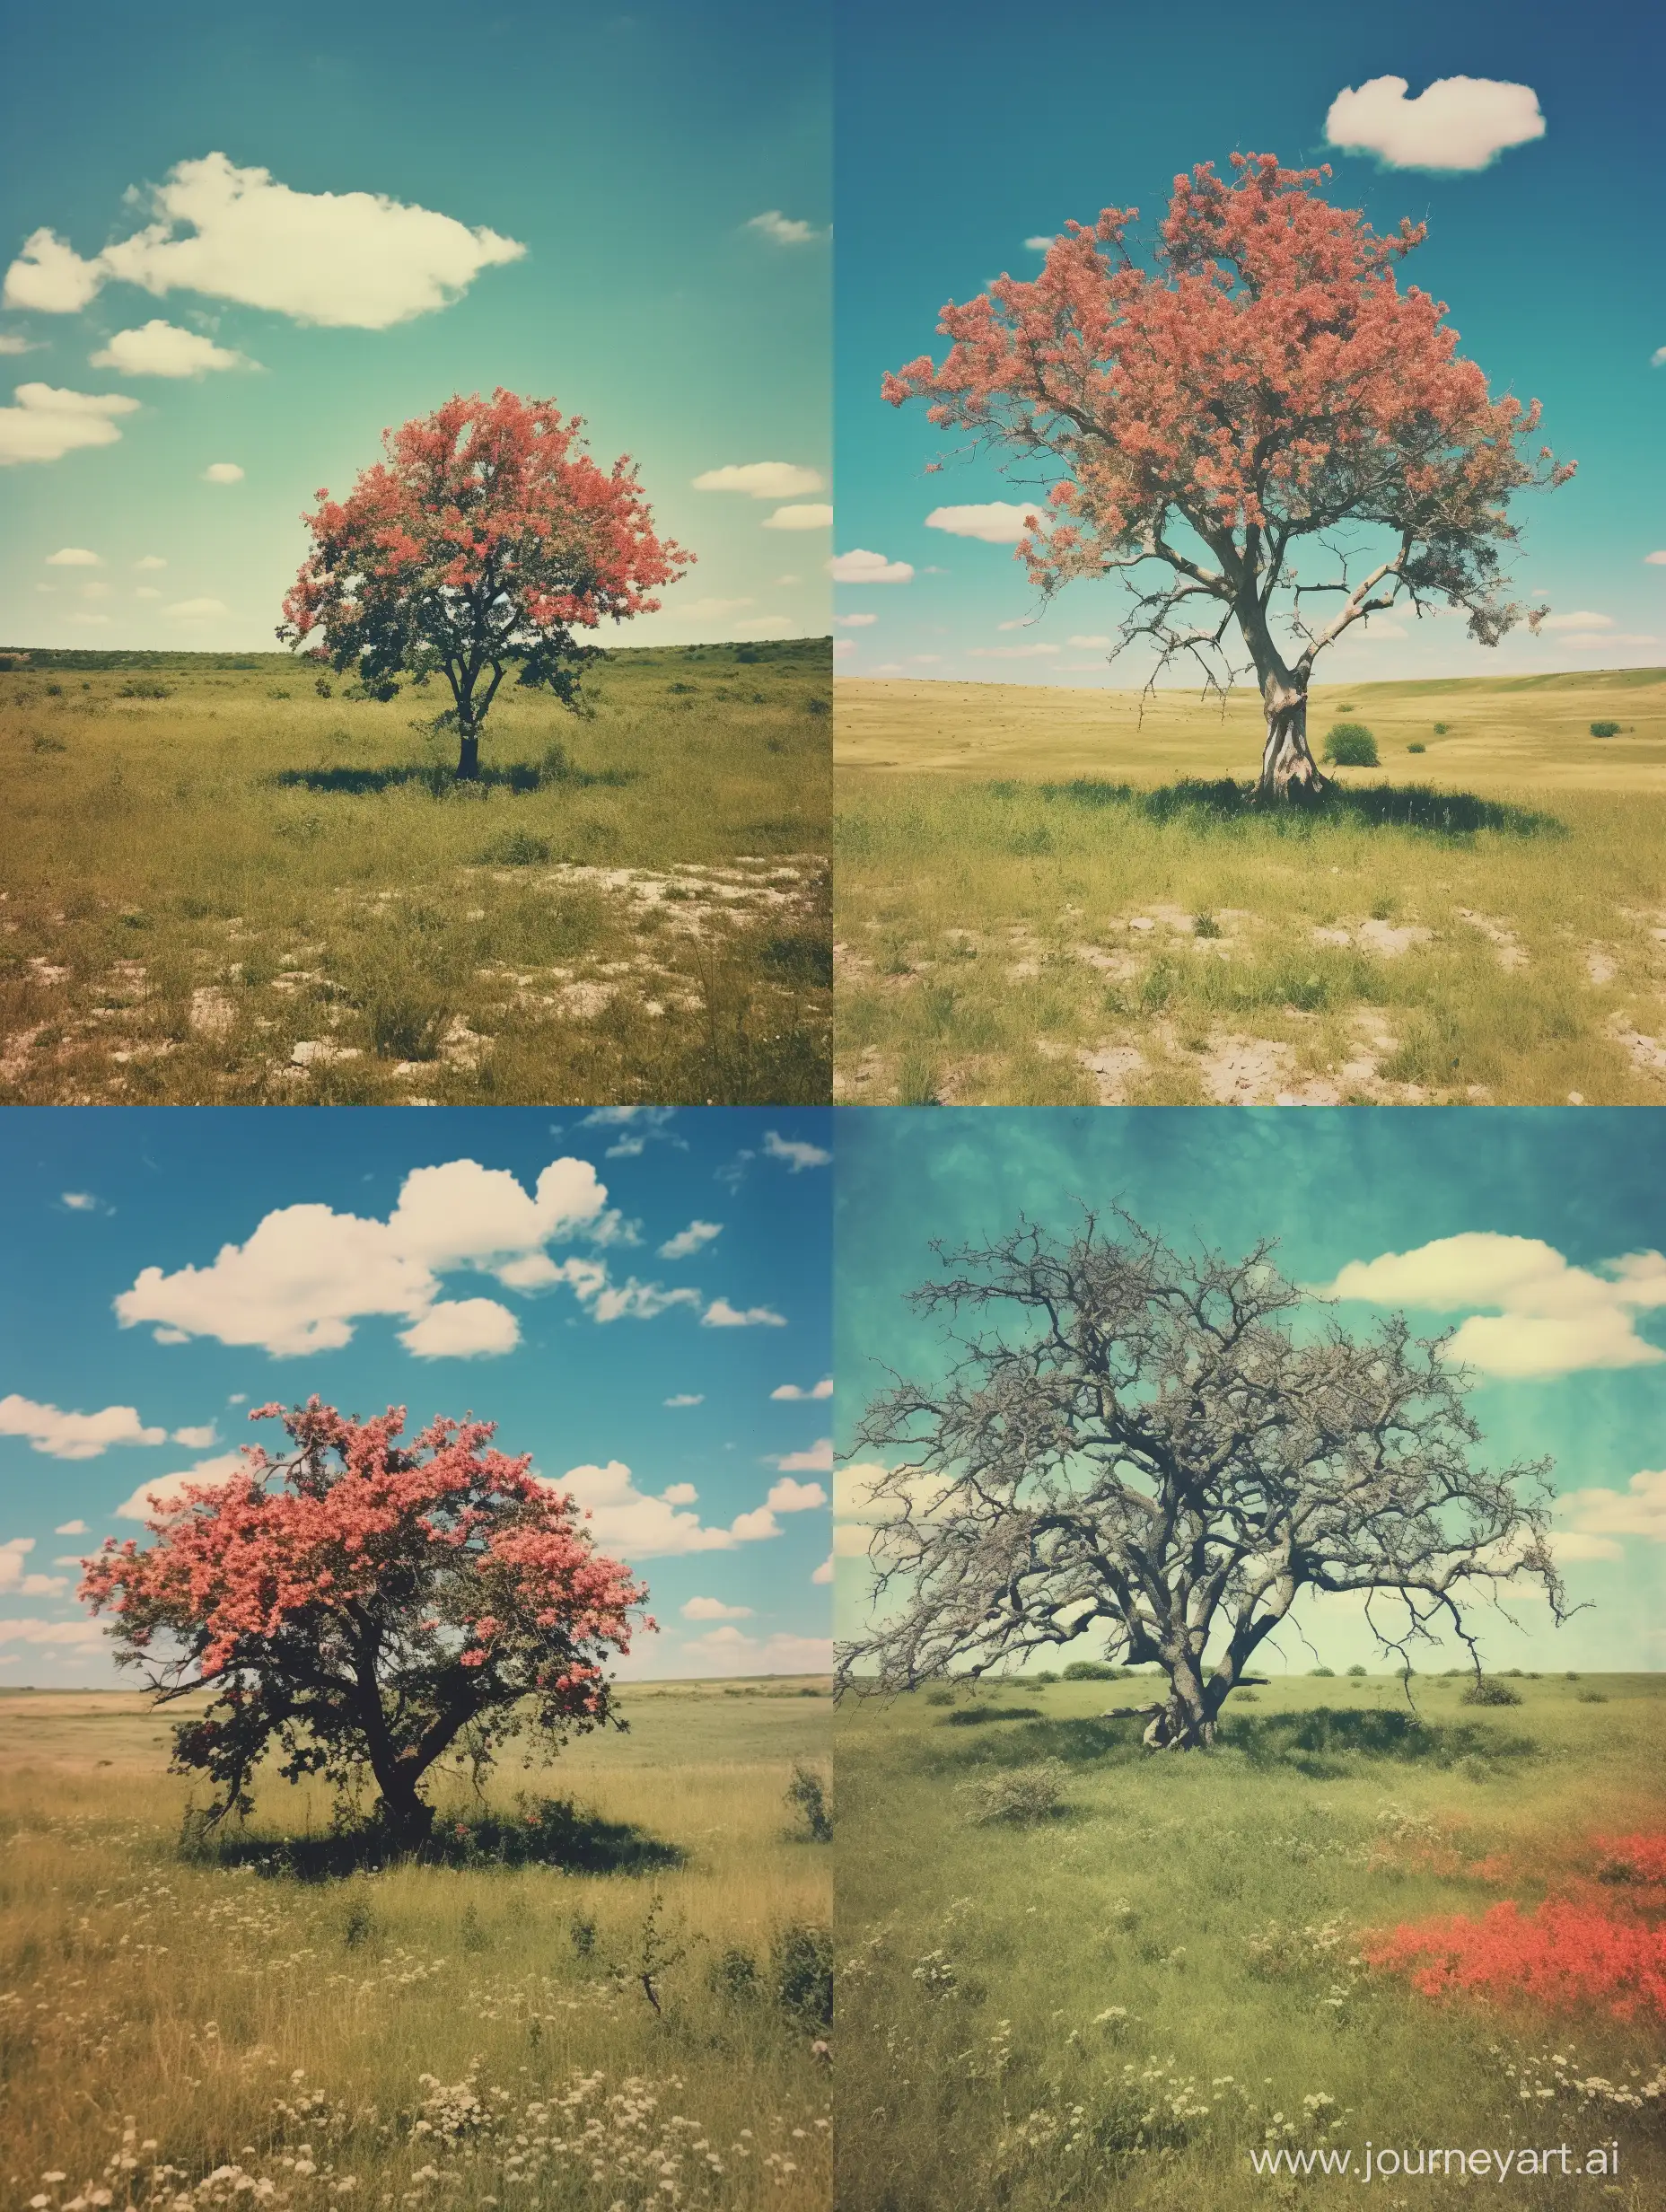 A detail of a blosson tree in the middle of a green field, blue sky, warm color palette, autochrome style, vintage